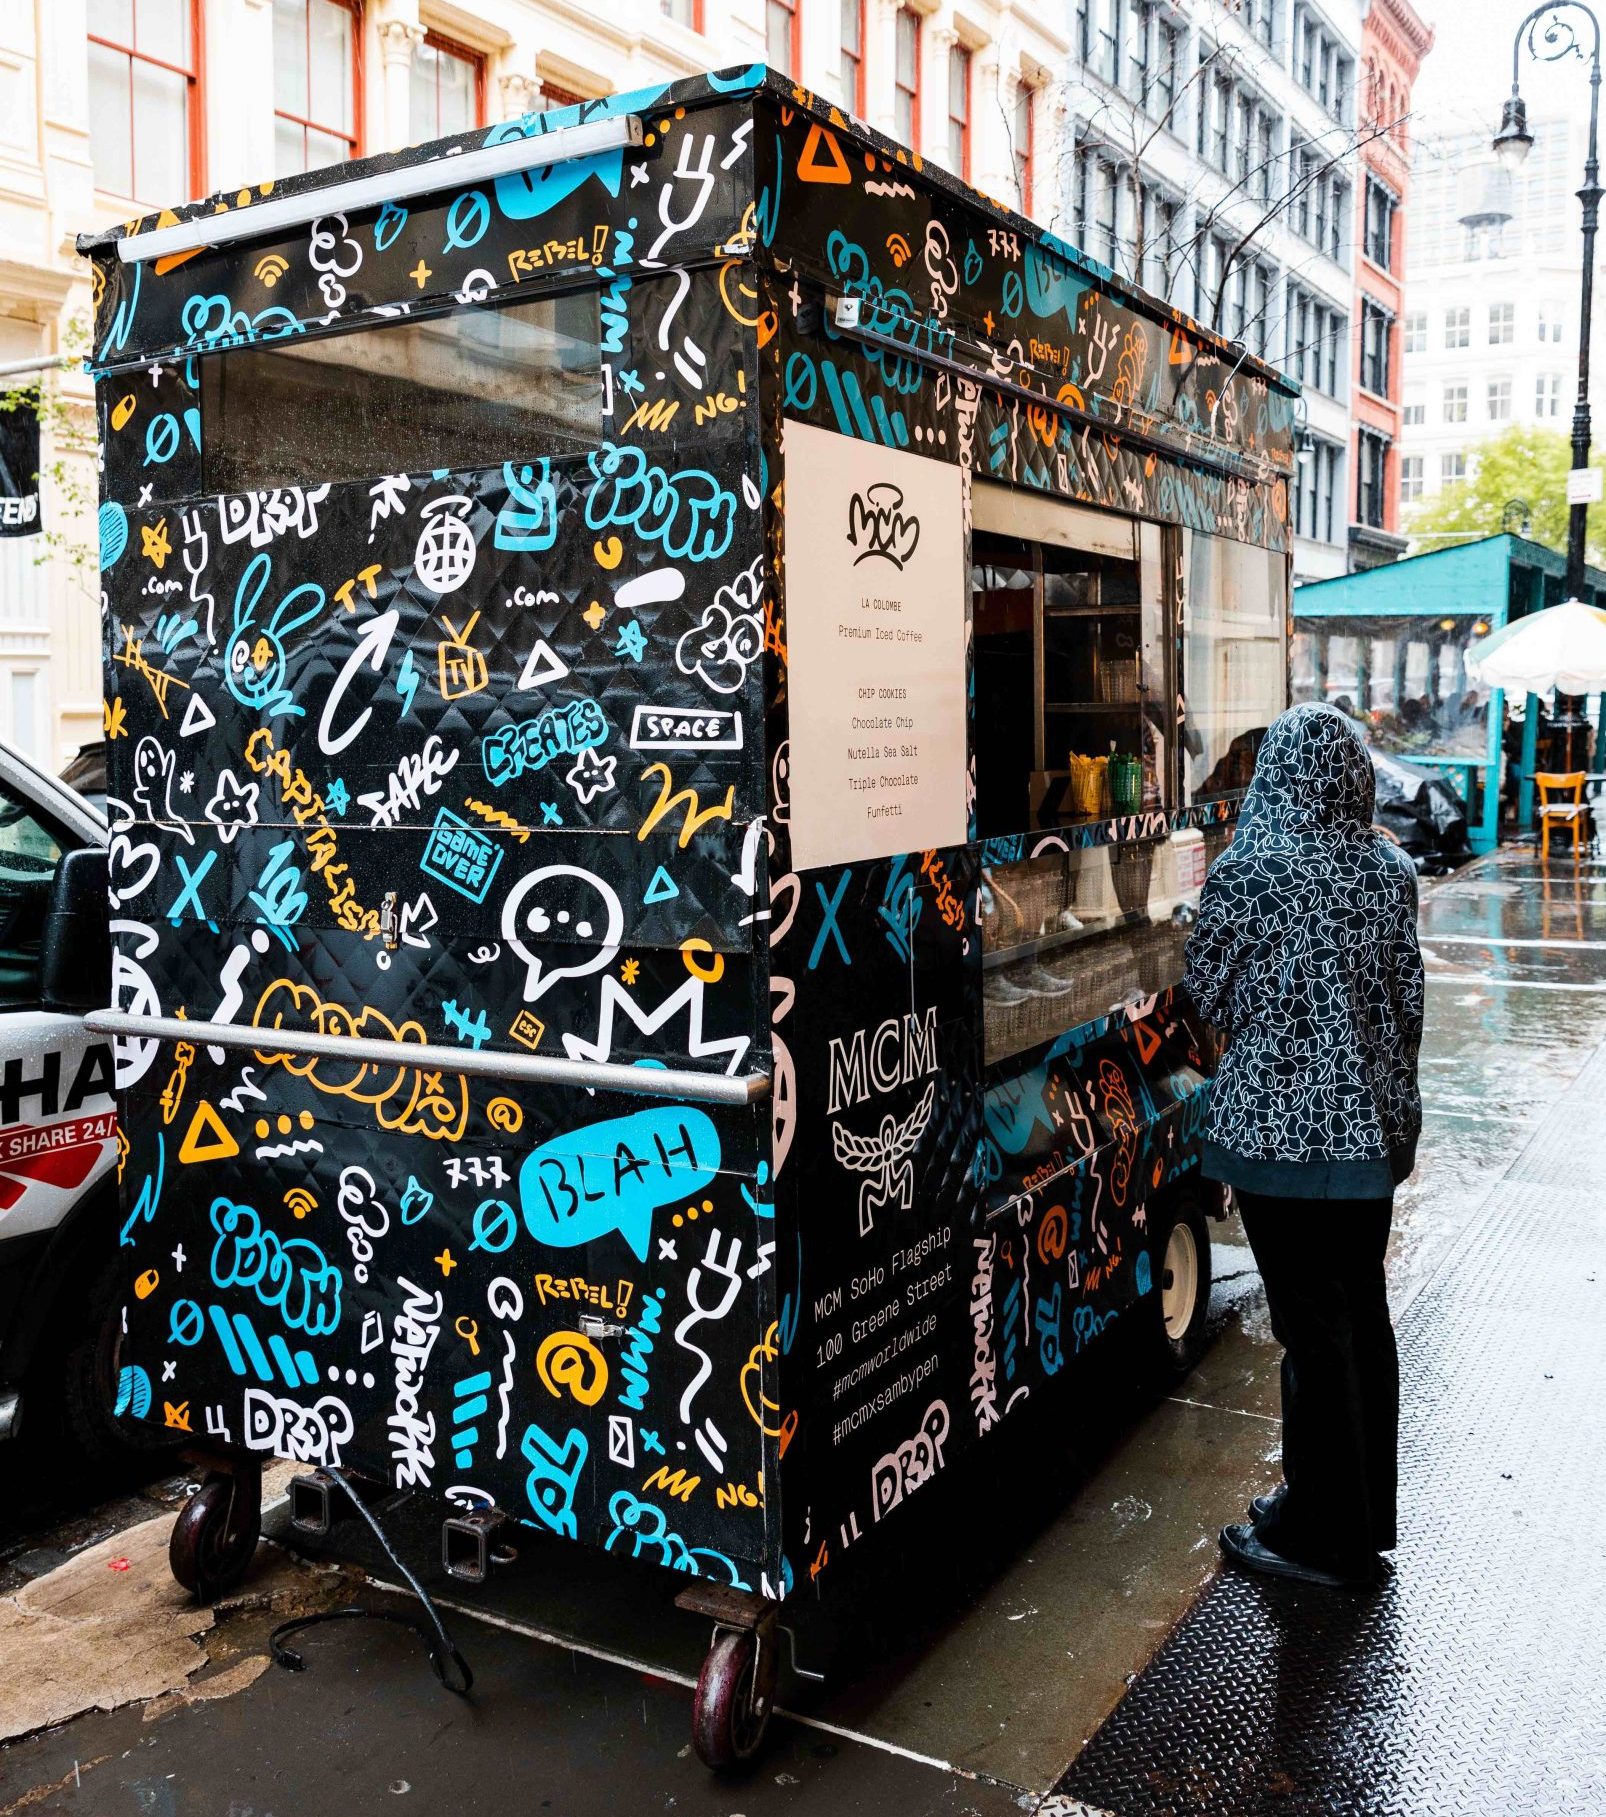 MCM Branded Coffee Cart Parked In NYC